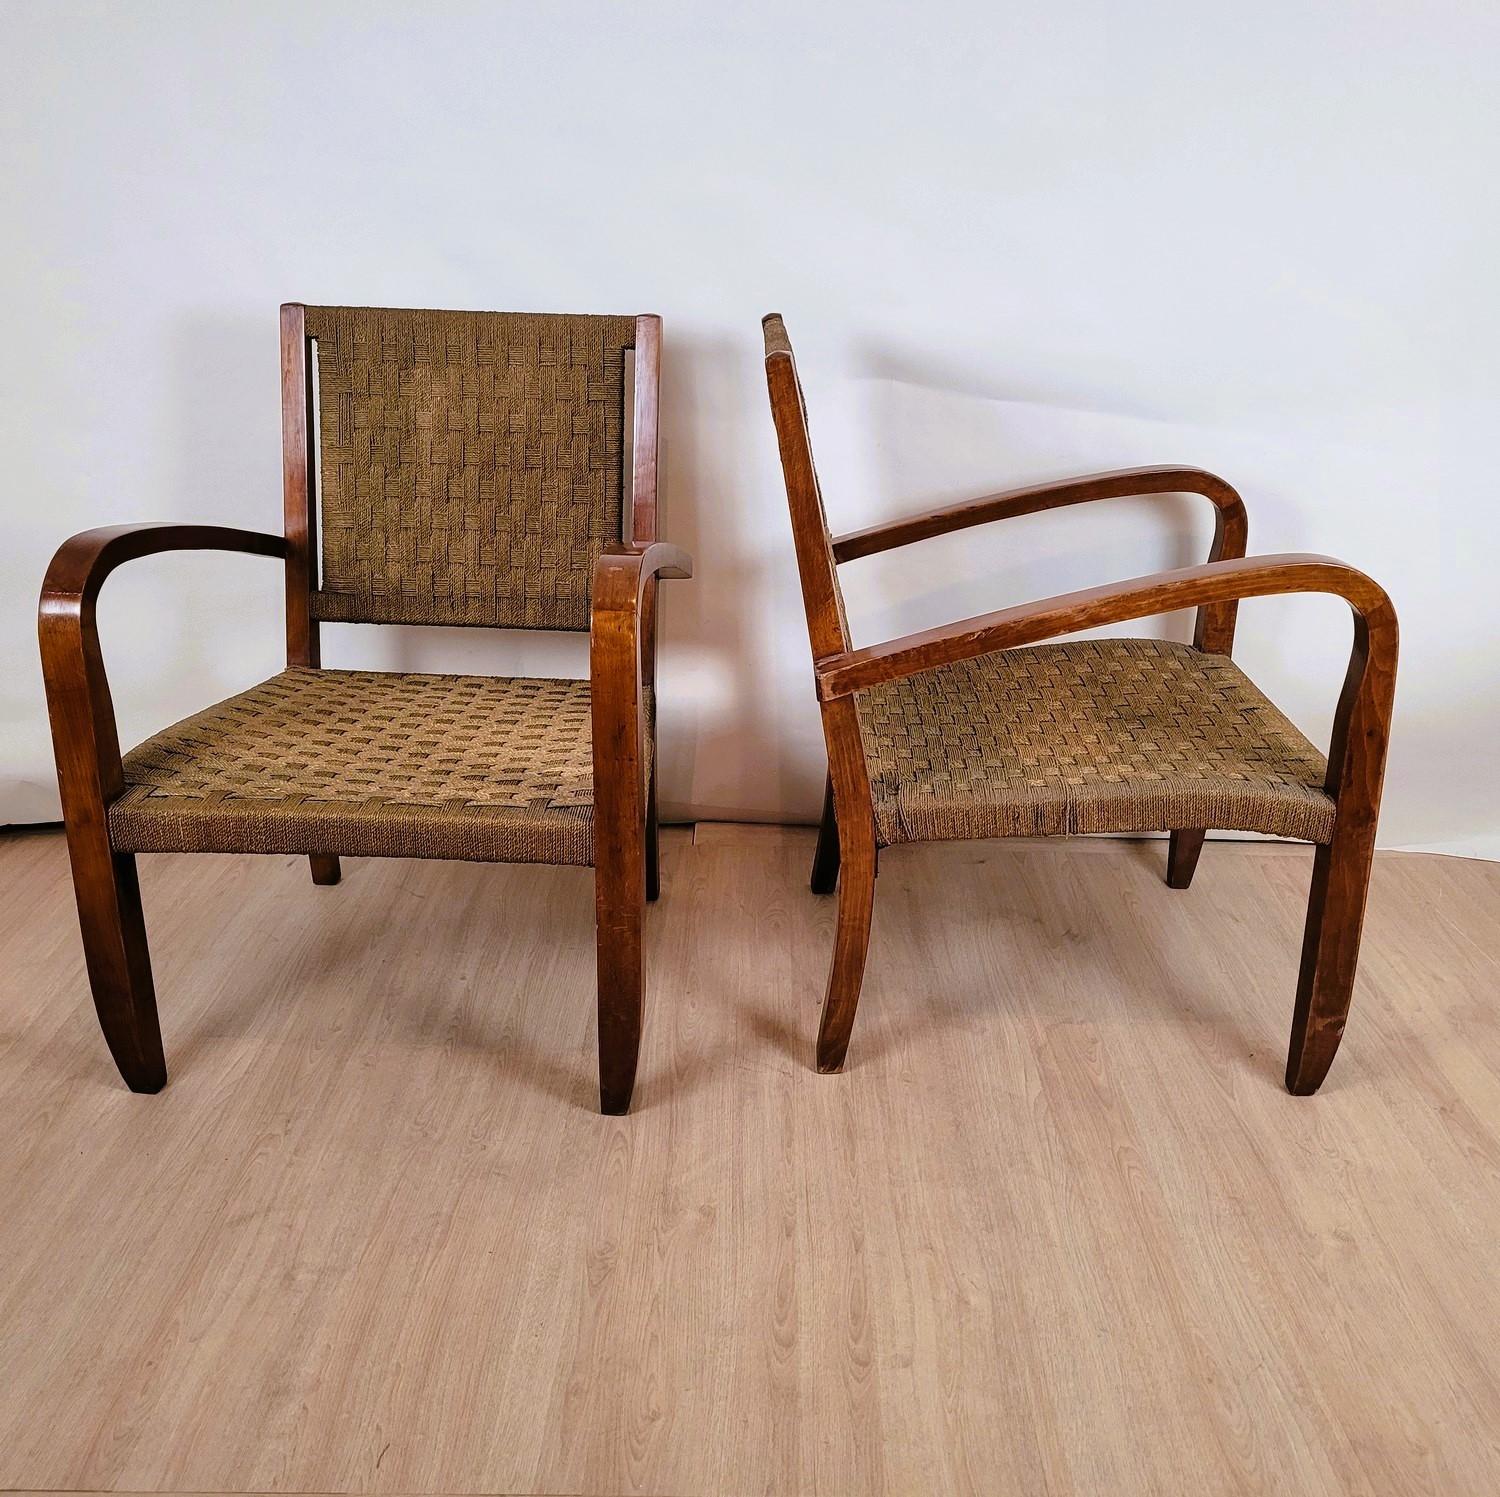 Pair of tinted wood armchairs with the seat and back in woven rope

Armchairs attributed to Erick Dieckmann, Bauhaus designer
Circa 1930

Wear and tear, some ropes to be reviewed

Height 85cm seat 40cm
62.5 x 61 cm